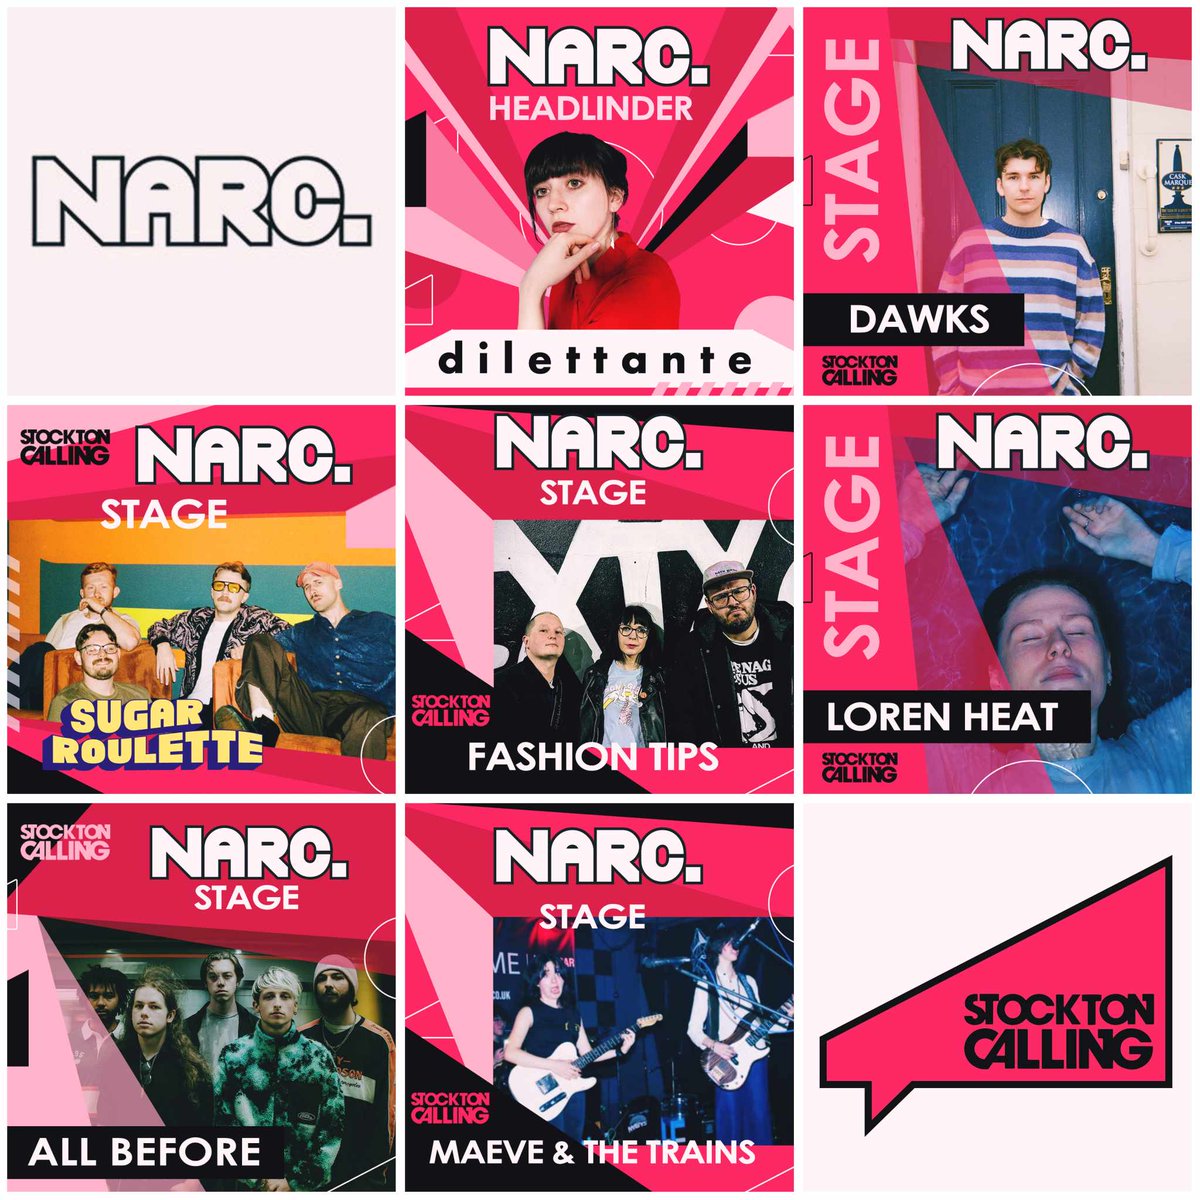 This Saturday (30/03)... @narc_magazine will be bringing the finest acts from around the NE to The Green Room Stage of @StocktonCalling. Inc. Dilettante, @dawksdawksdawks, @SugarRoulette, @fashiontipsband, Loren Heat, All Before and Maeve & The Trains 🎟 stocktoncalling.co.uk